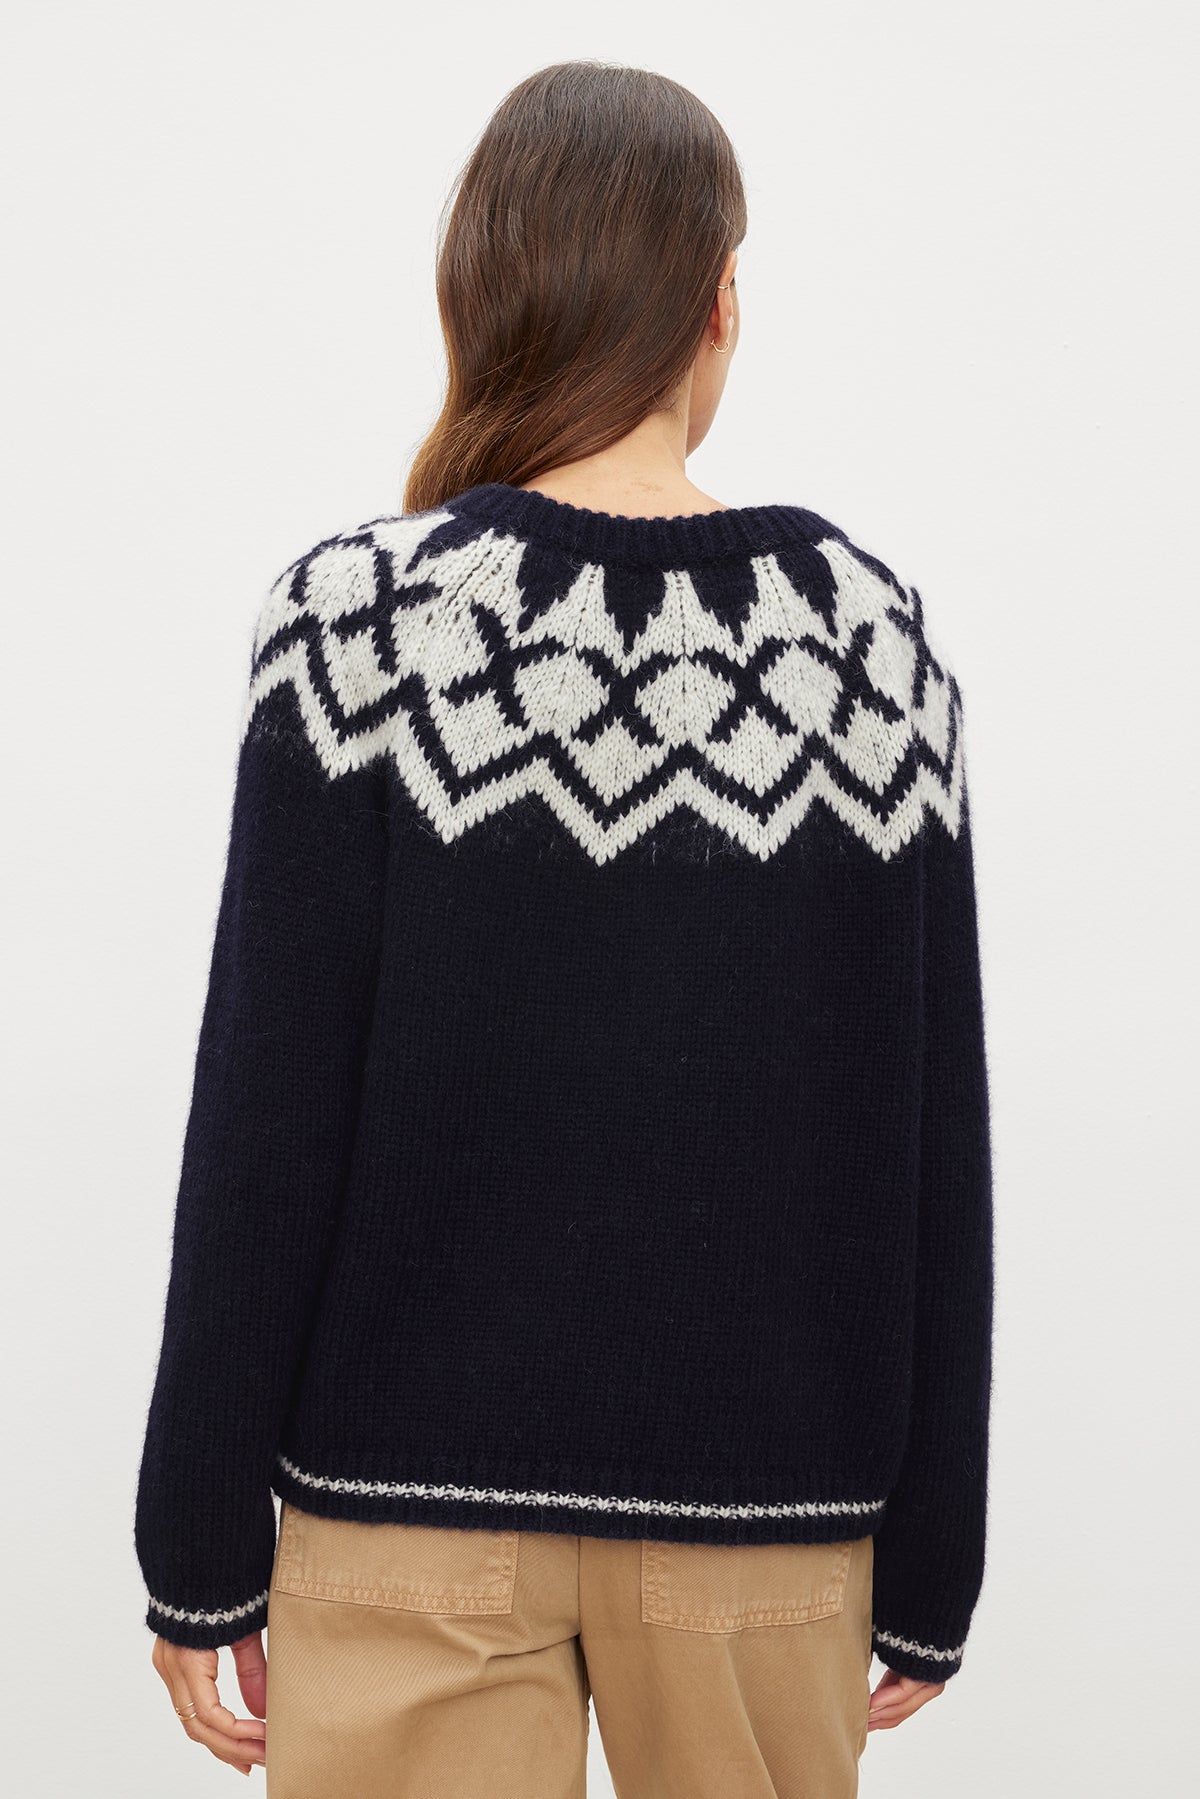 The back view of a woman wearing a Velvet by Graham & Spencer Alexa Fair Isle Crew Neck Sweater.-35572030111937